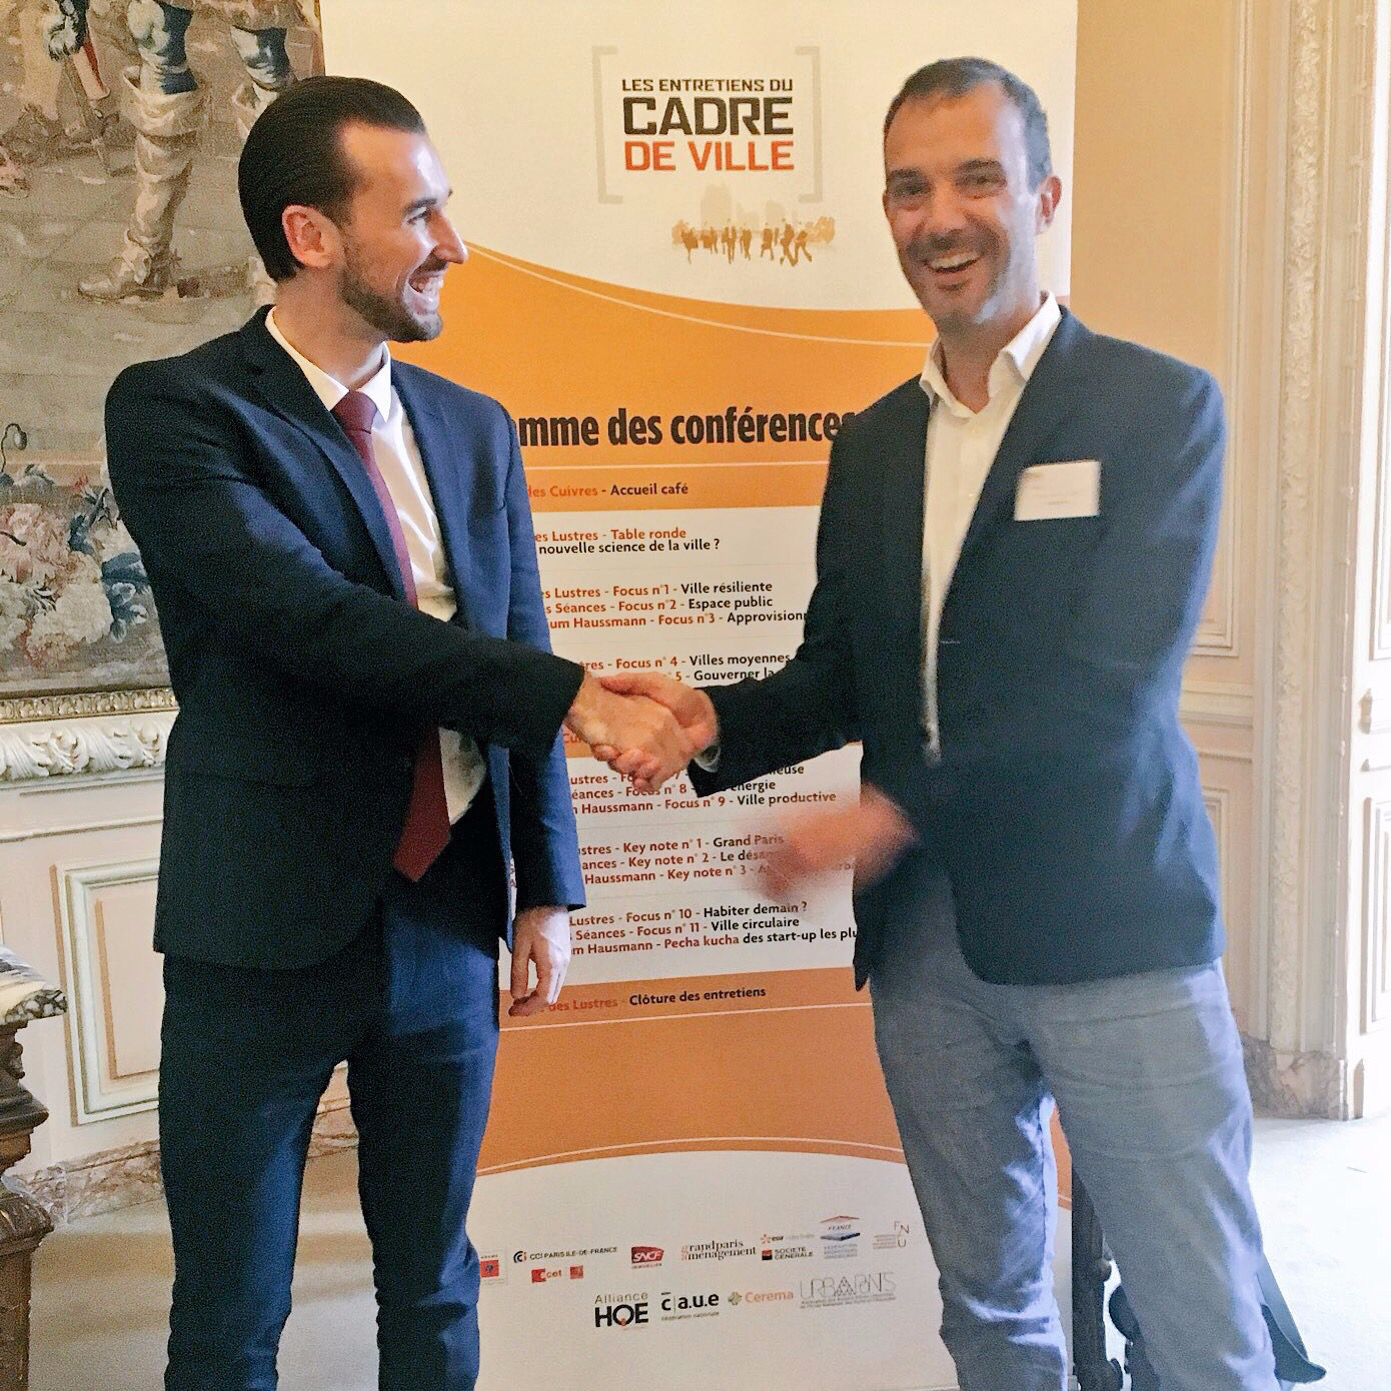 Agritecture Founder and Managing Director Henry Gordon-Smith (left), with Agence 360 Co-Founder and President François-Laurent Touzain (right).